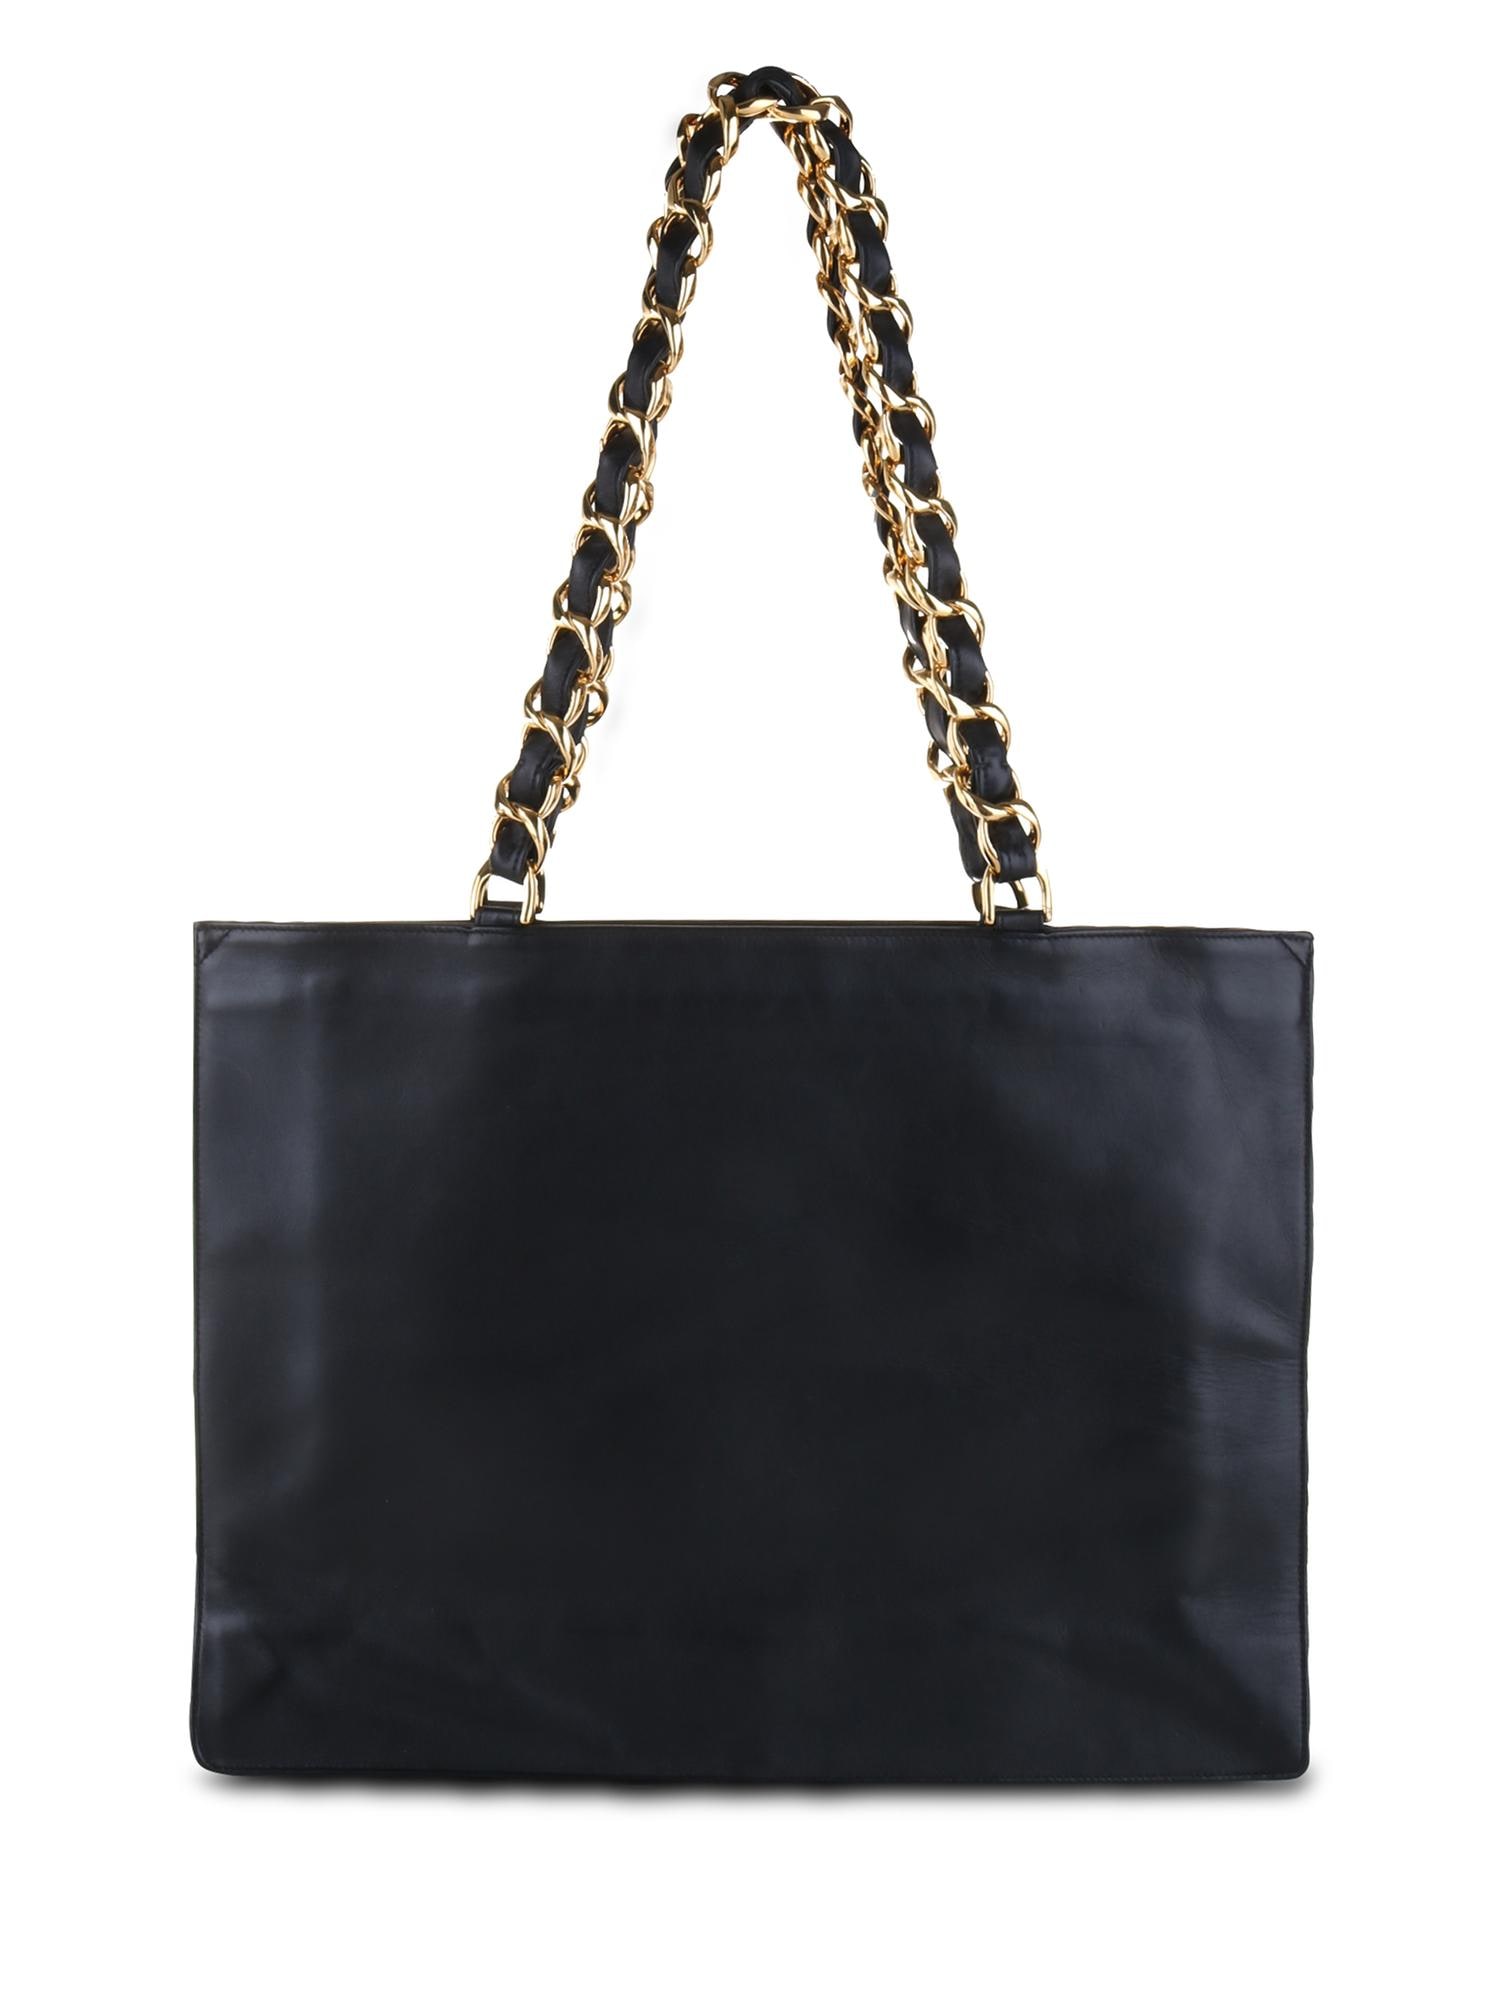 LUXE FINDS &#124 Chanel Black Lambskin Flat Chain Tote